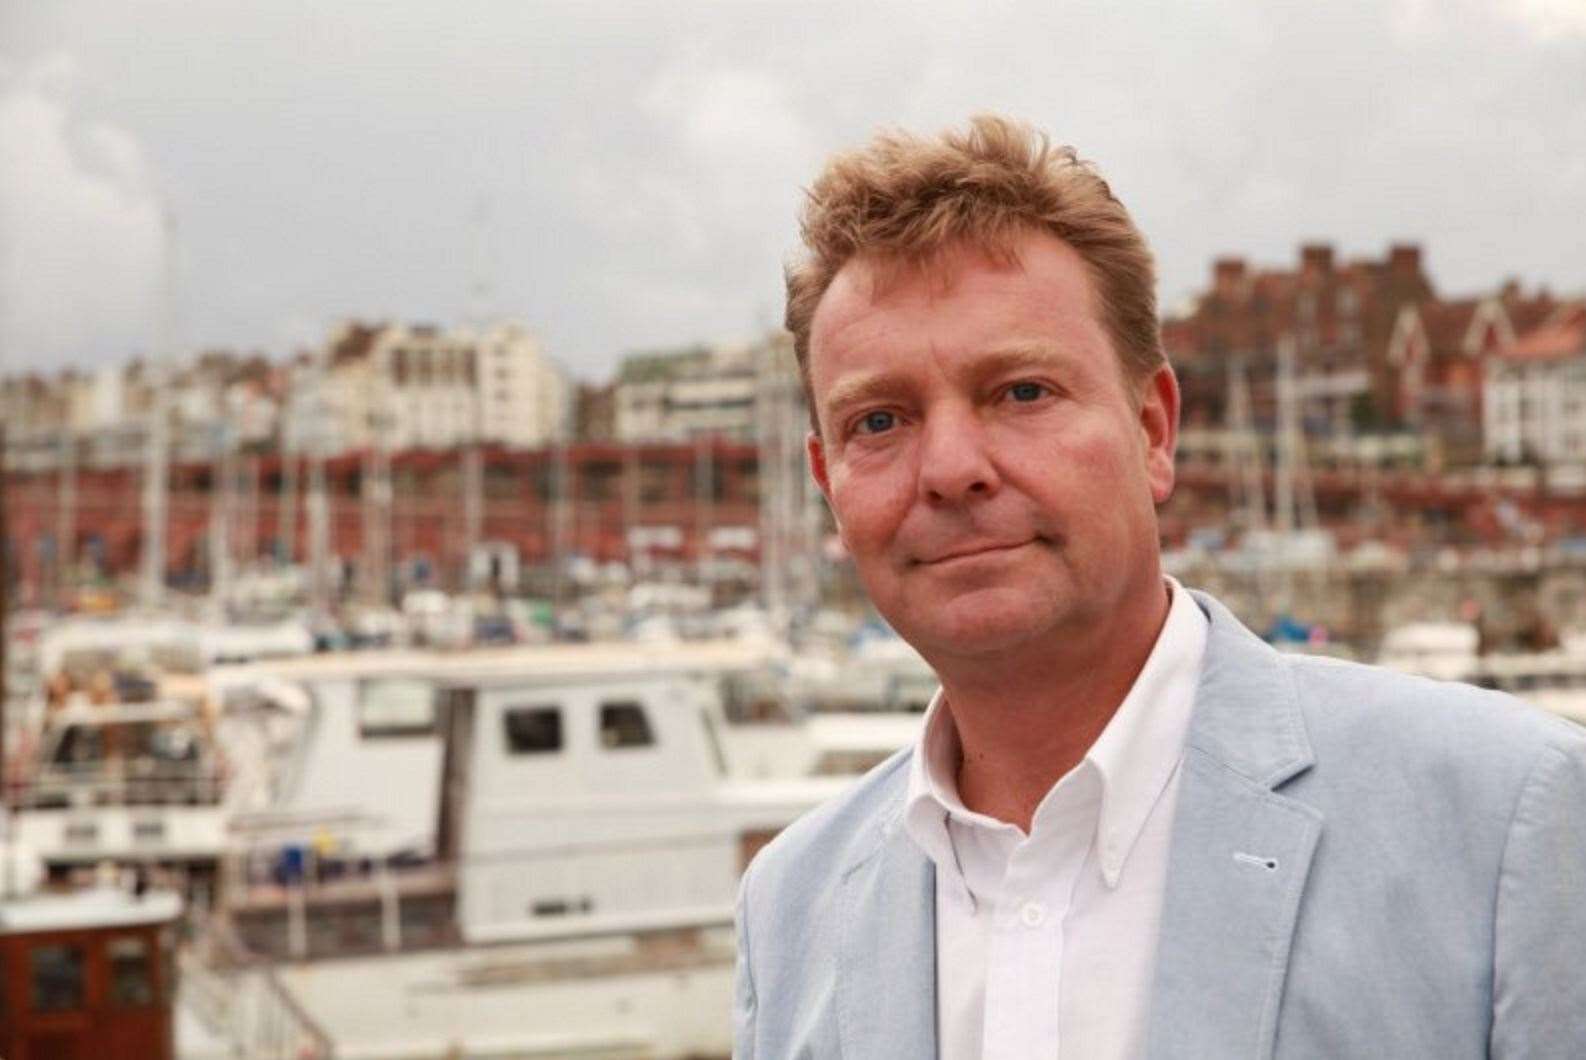 South Thanet MP Craig Mackinlay has the location in Broadstairs was "never appropriate"